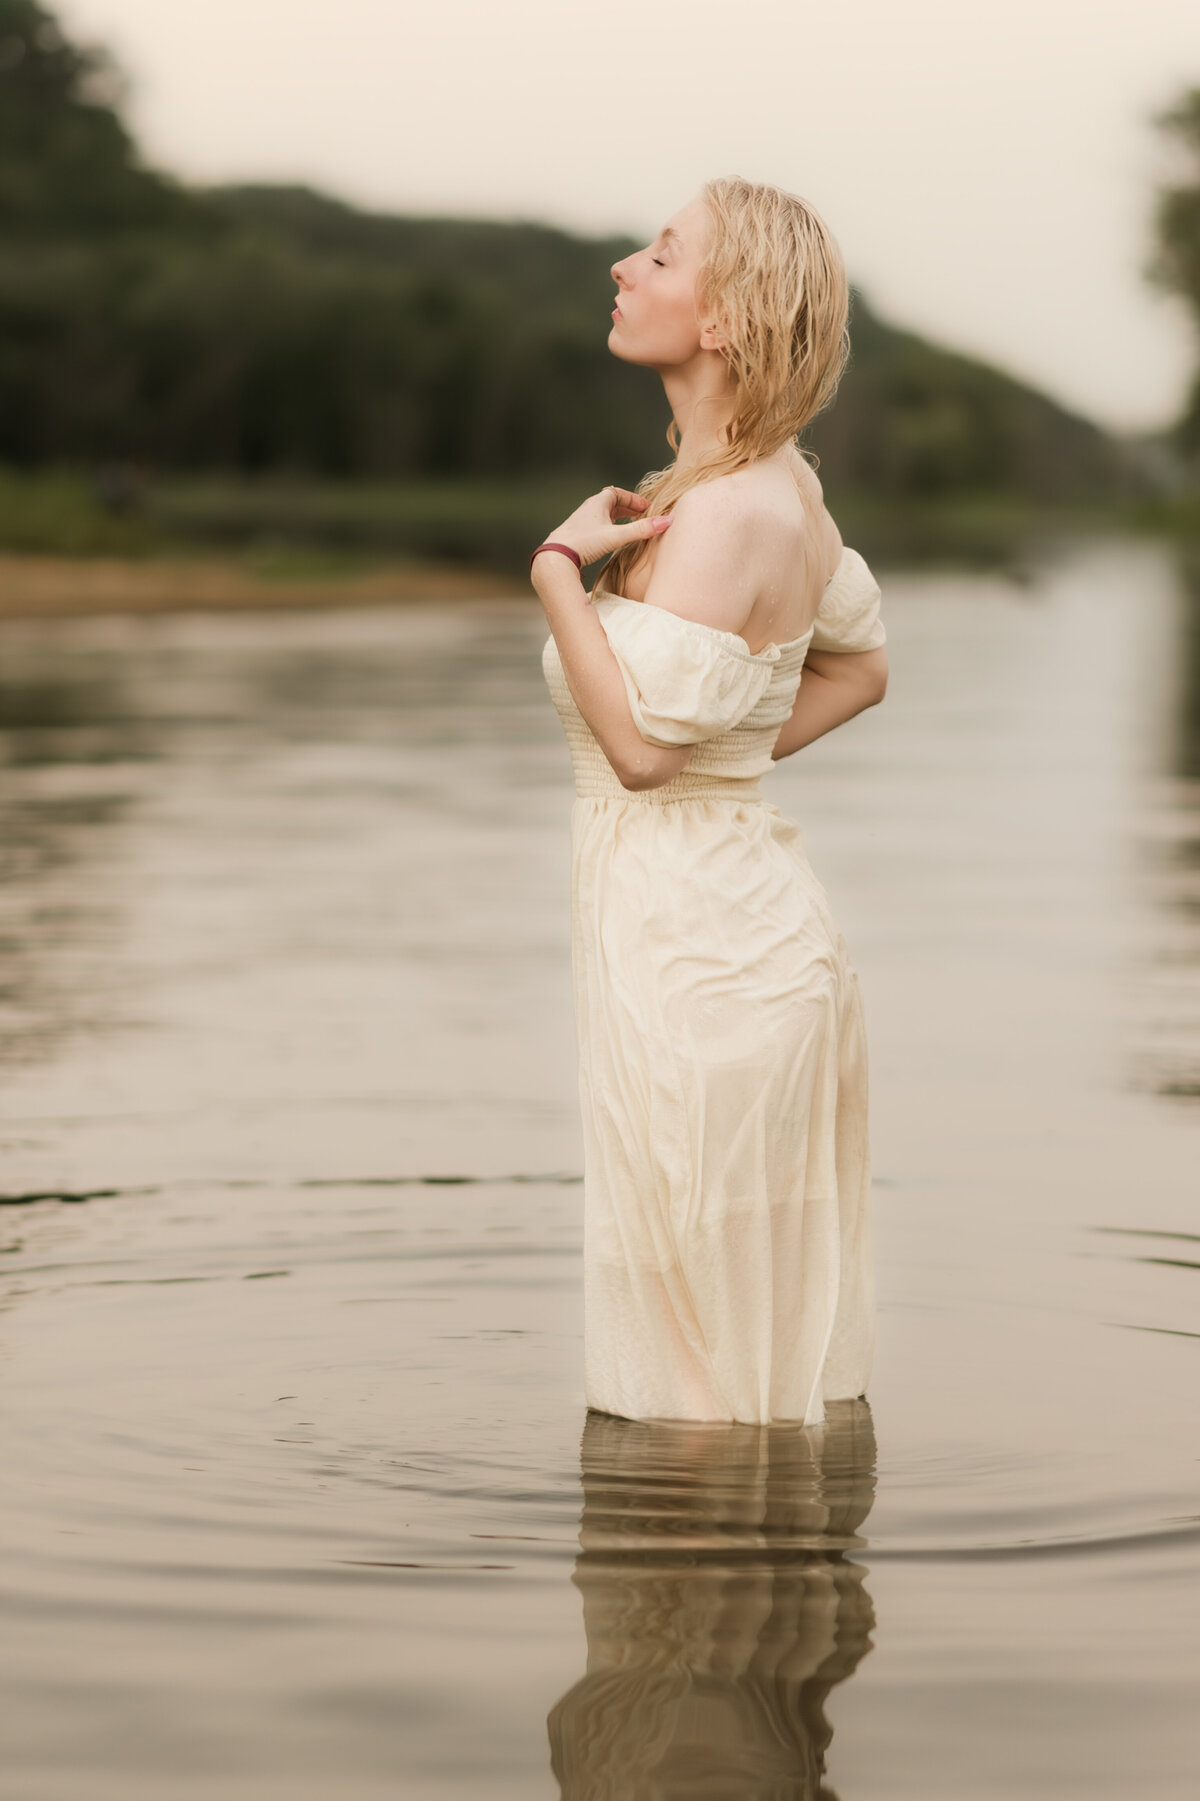 Craft riverfront radiance with Shannon Kathleen Photography's Minneapolis senior portraits in the embrace of natural beauty. Transform moments into captivating art. Book your session today.